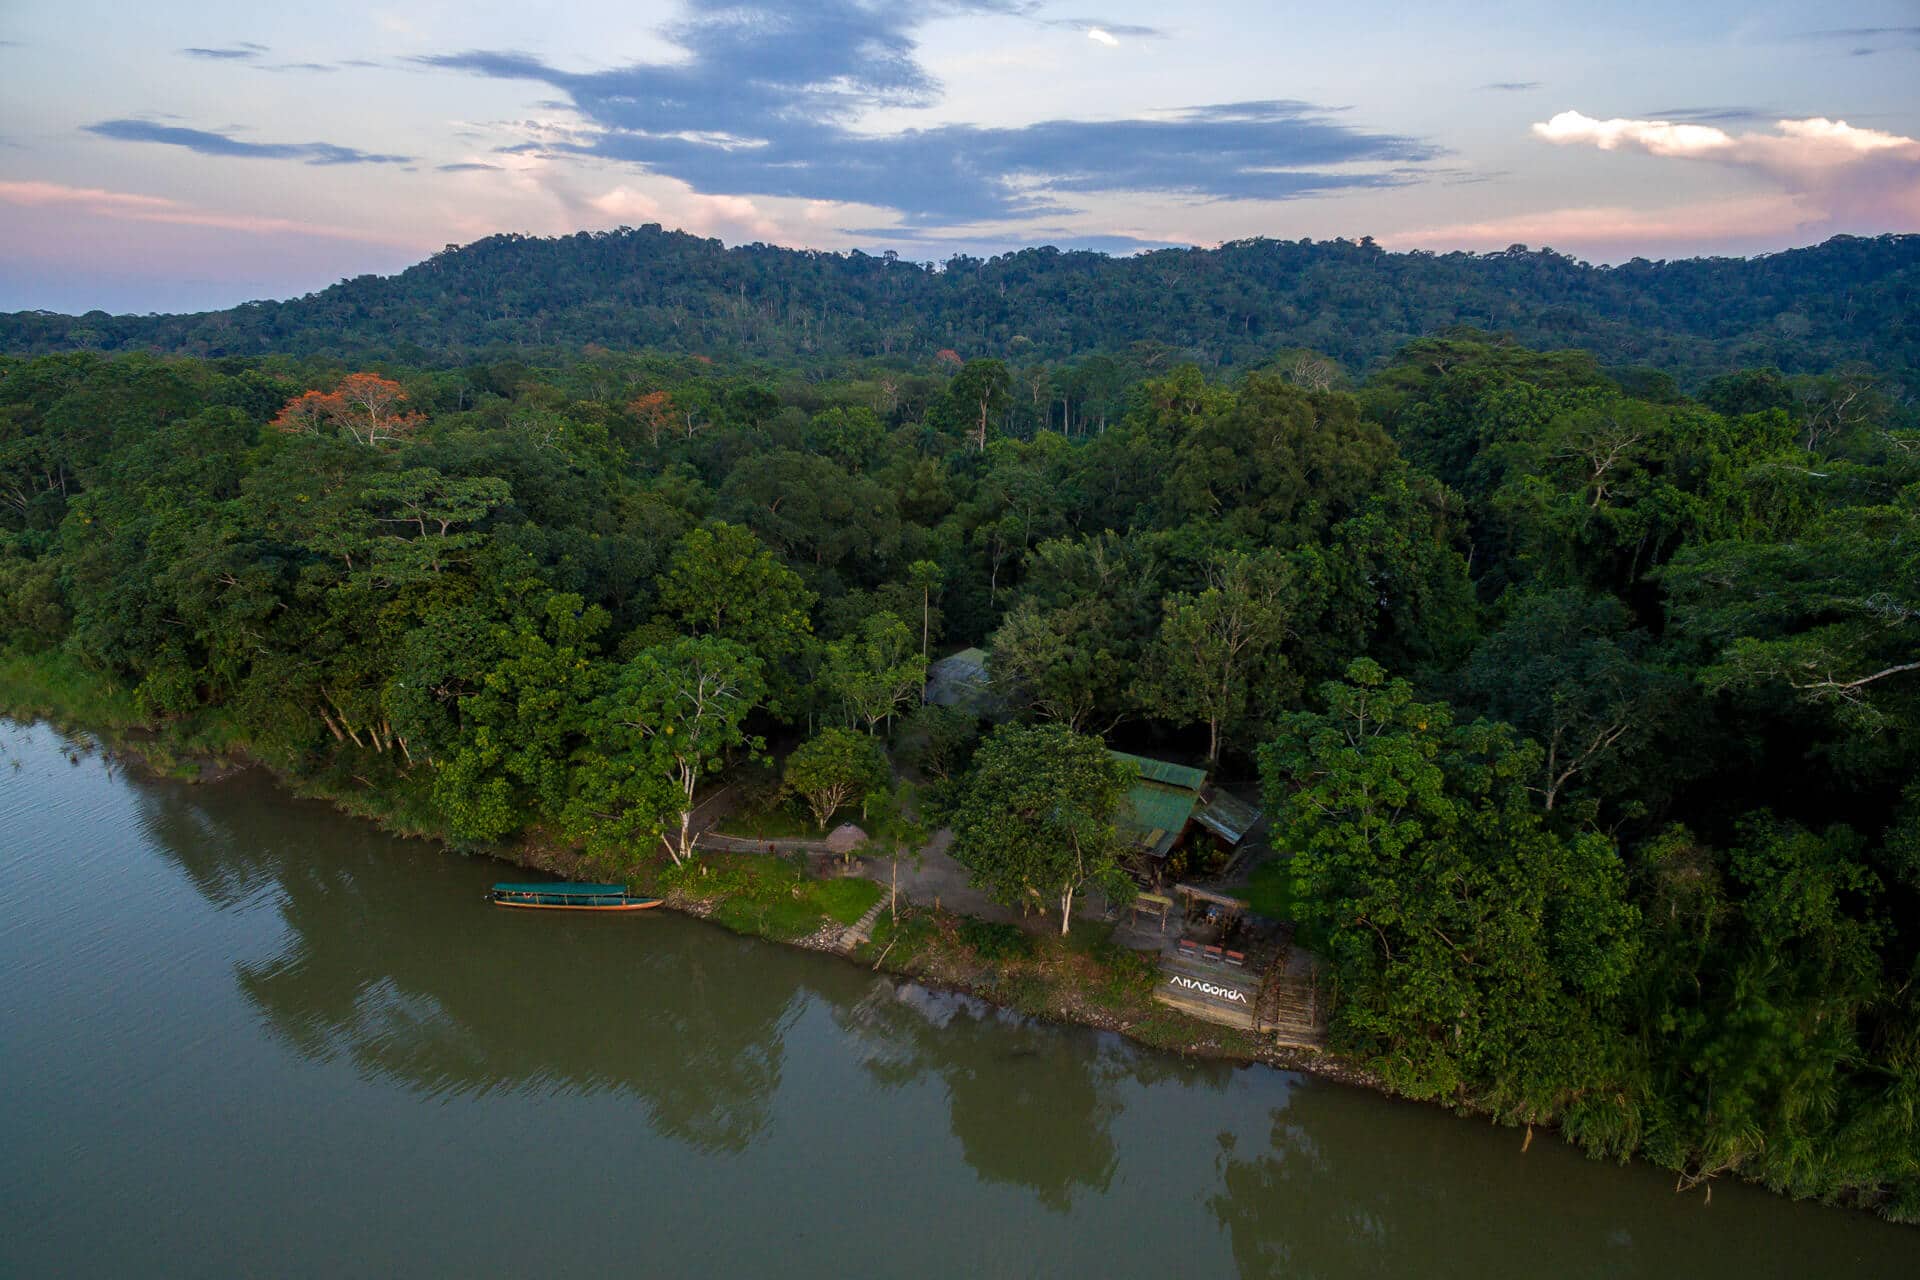 How to choose an amazon jungle tour